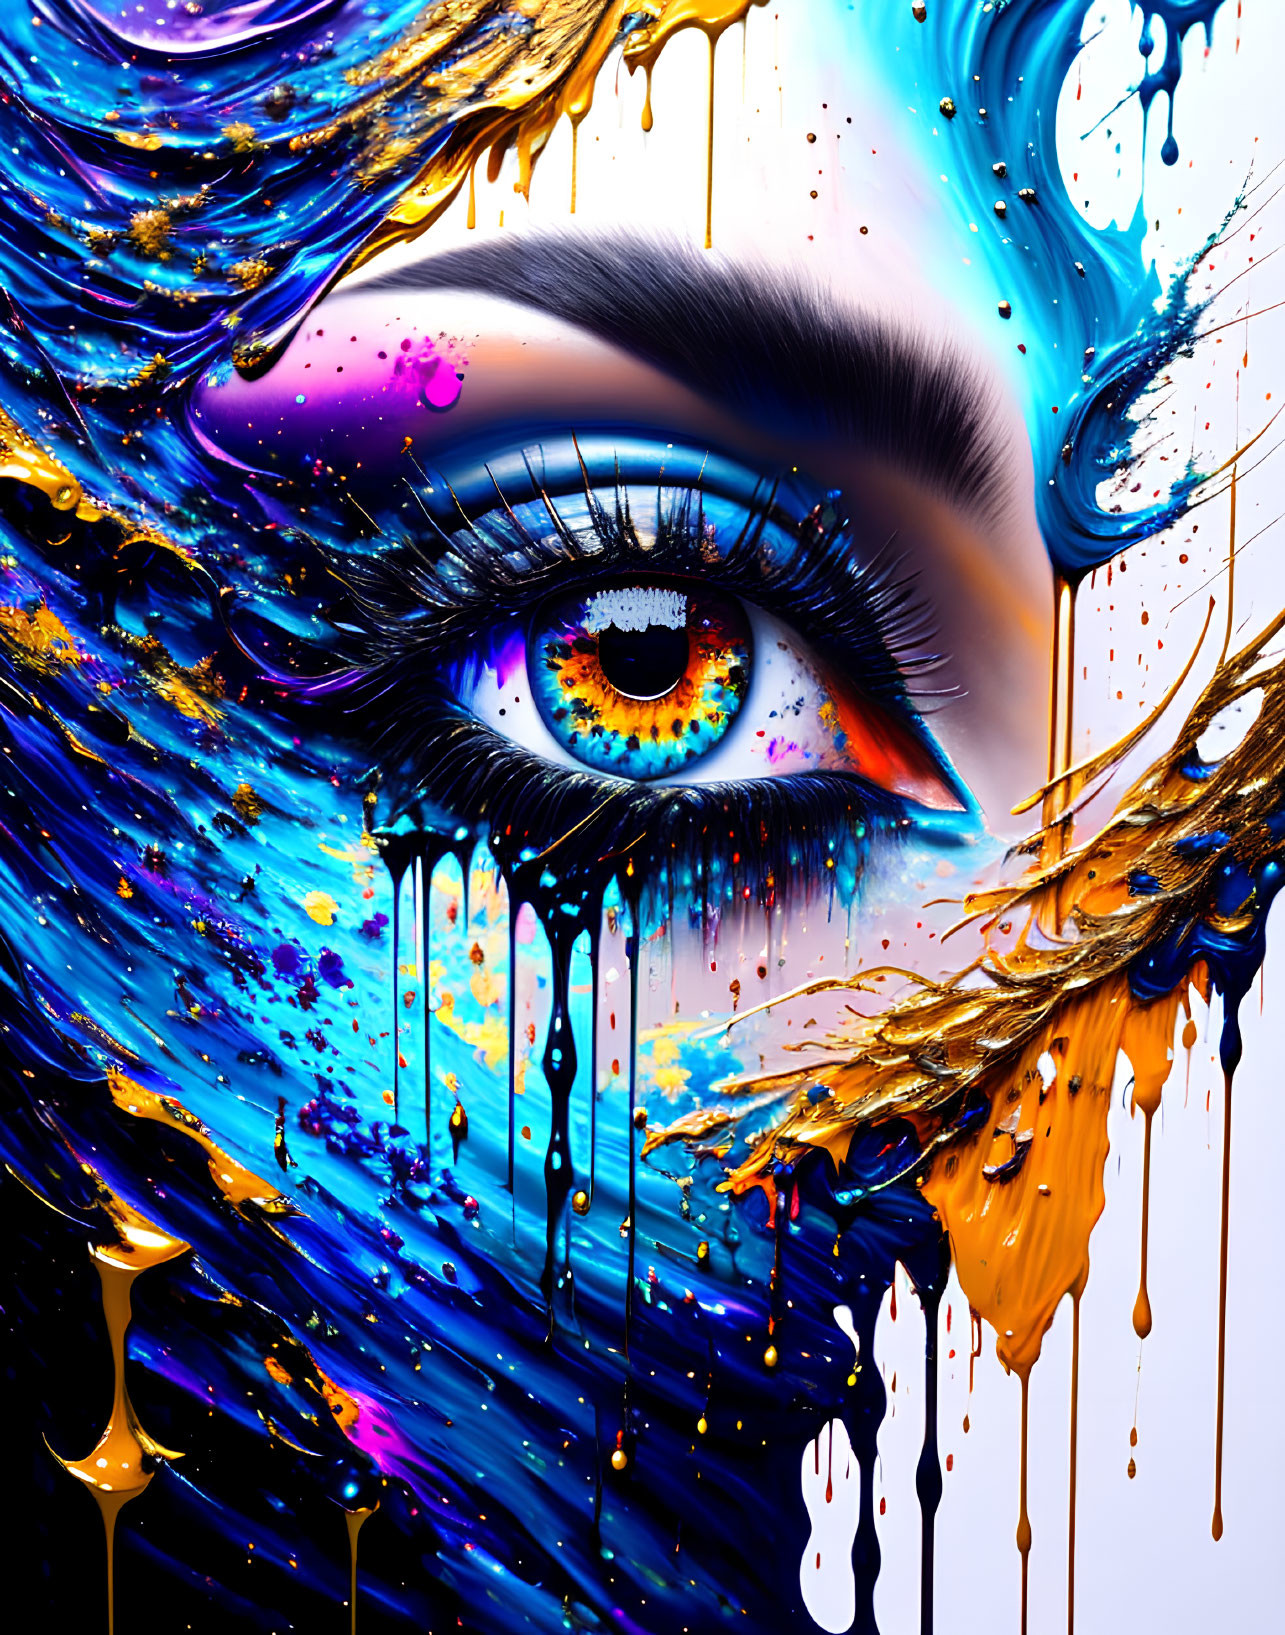 Colorful human eye artwork with blue, gold, and purple splashes